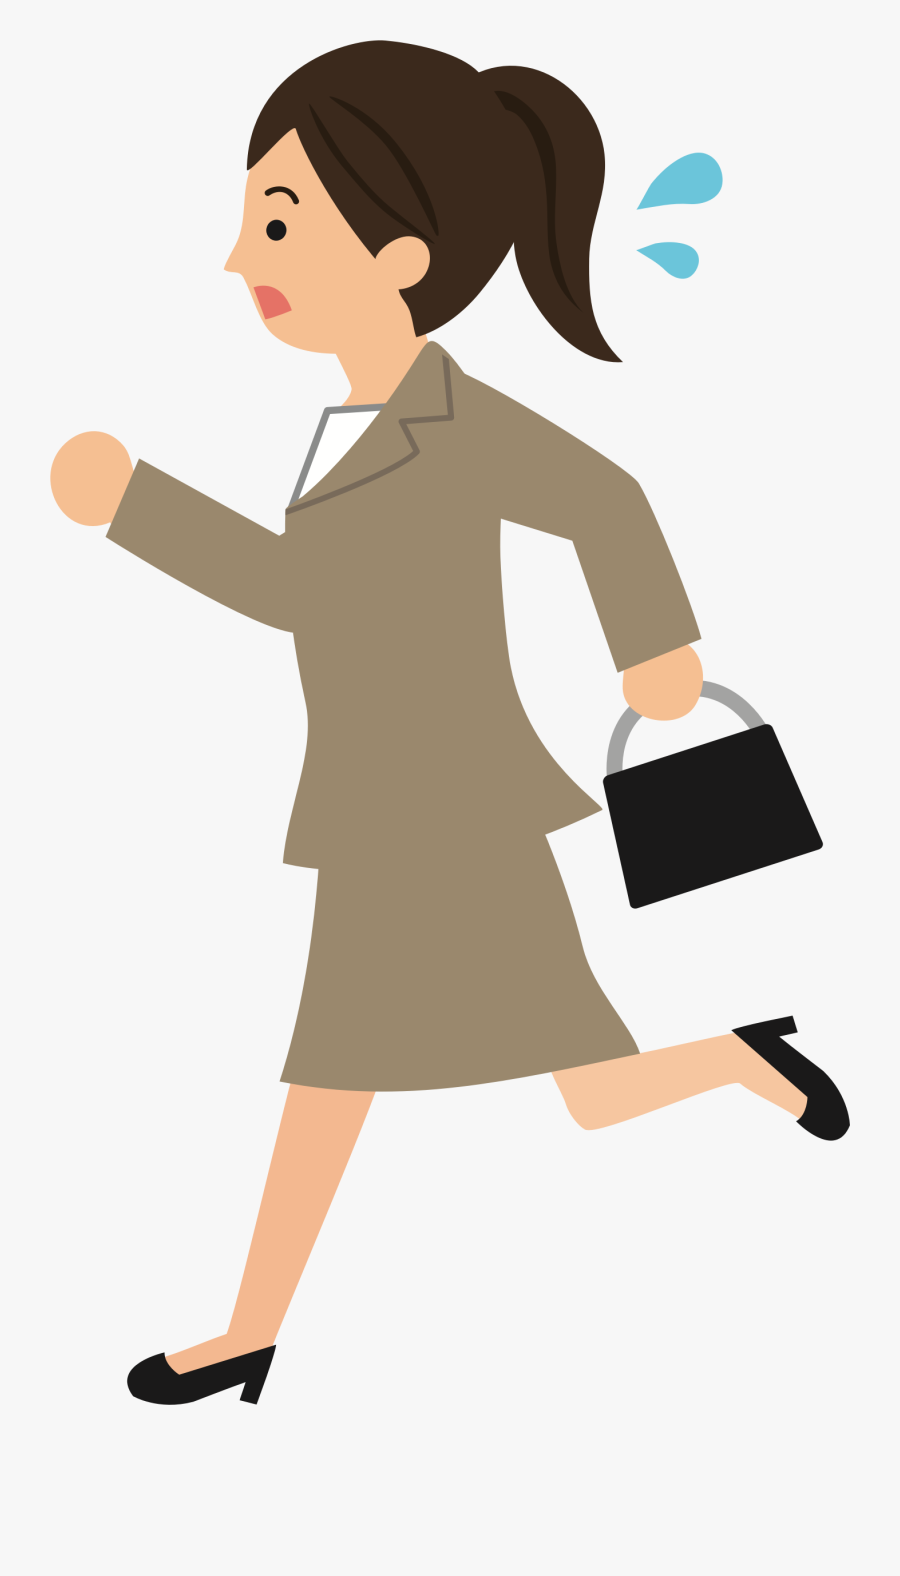 Late For Work - Late For Work Clipart, Transparent Clipart